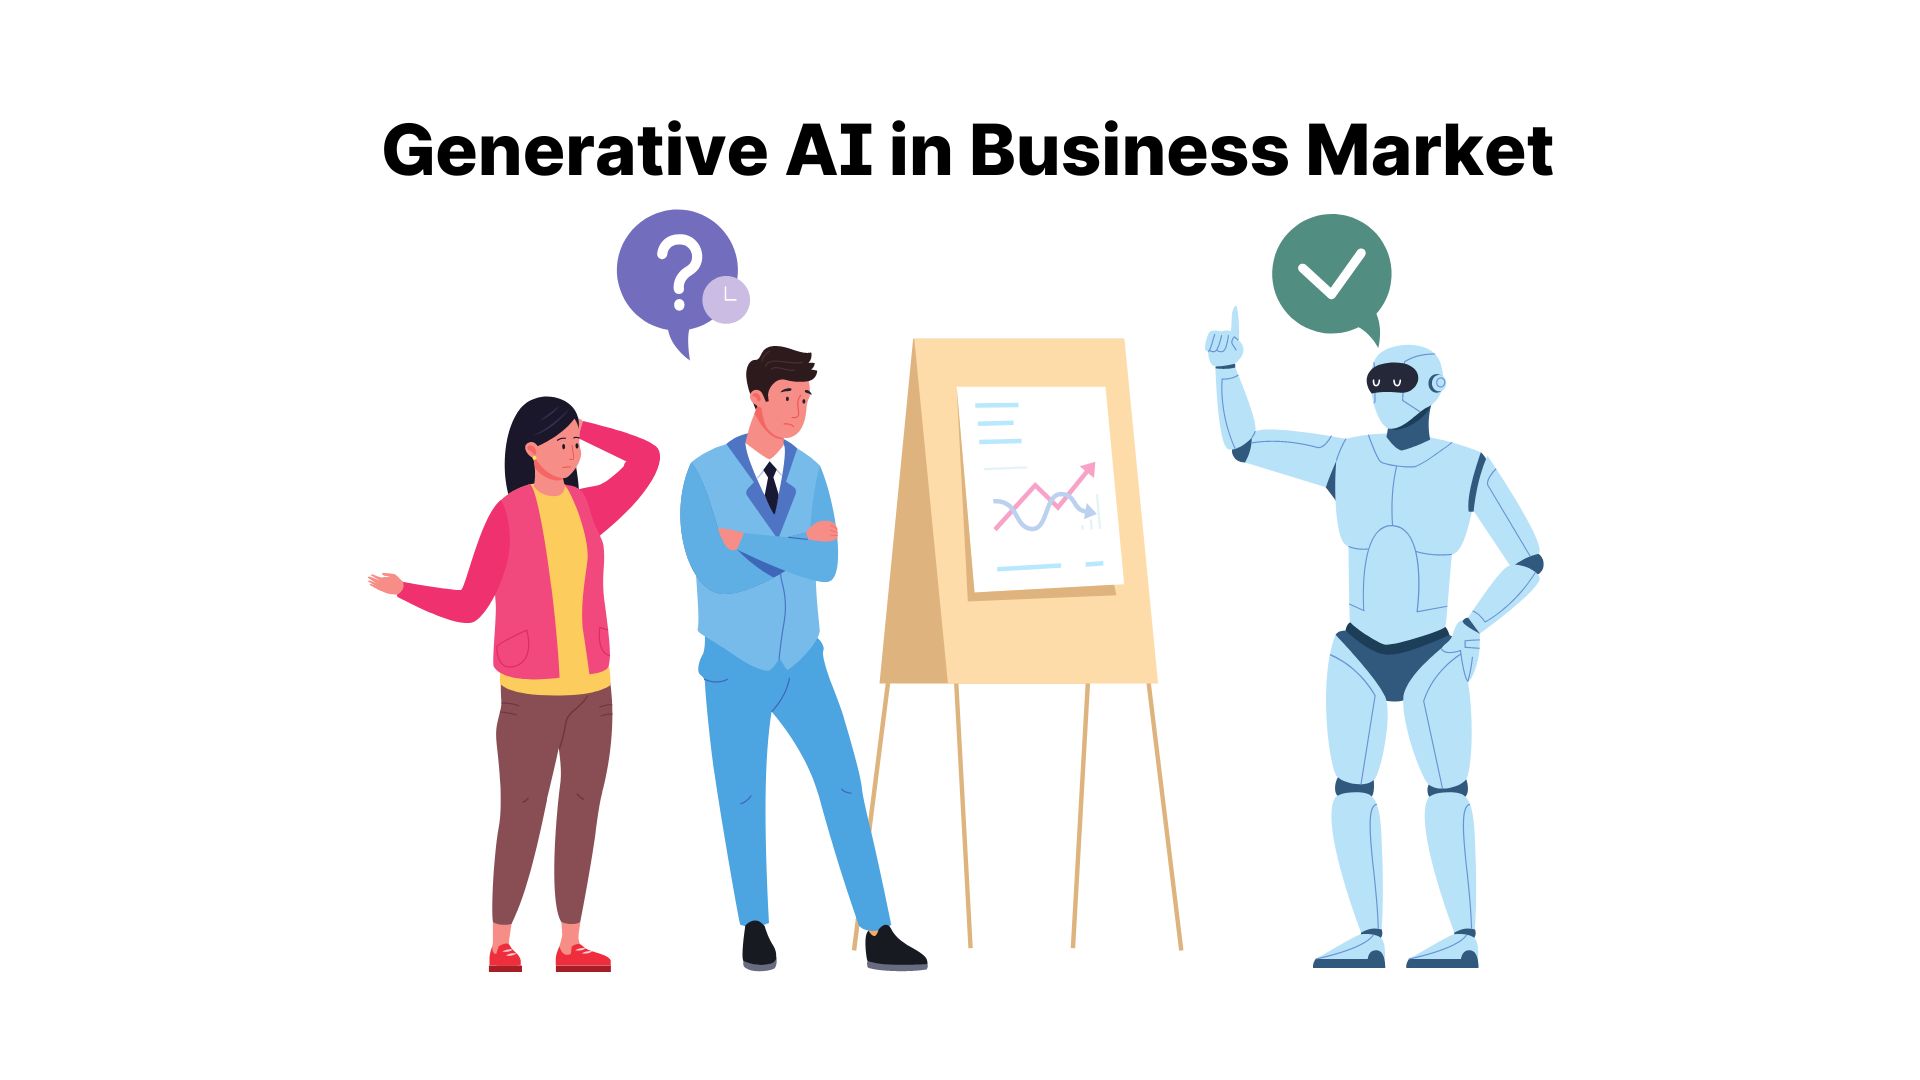 Generative AI in Business Market Size is projected to grow at a CAGR of over 33.5%